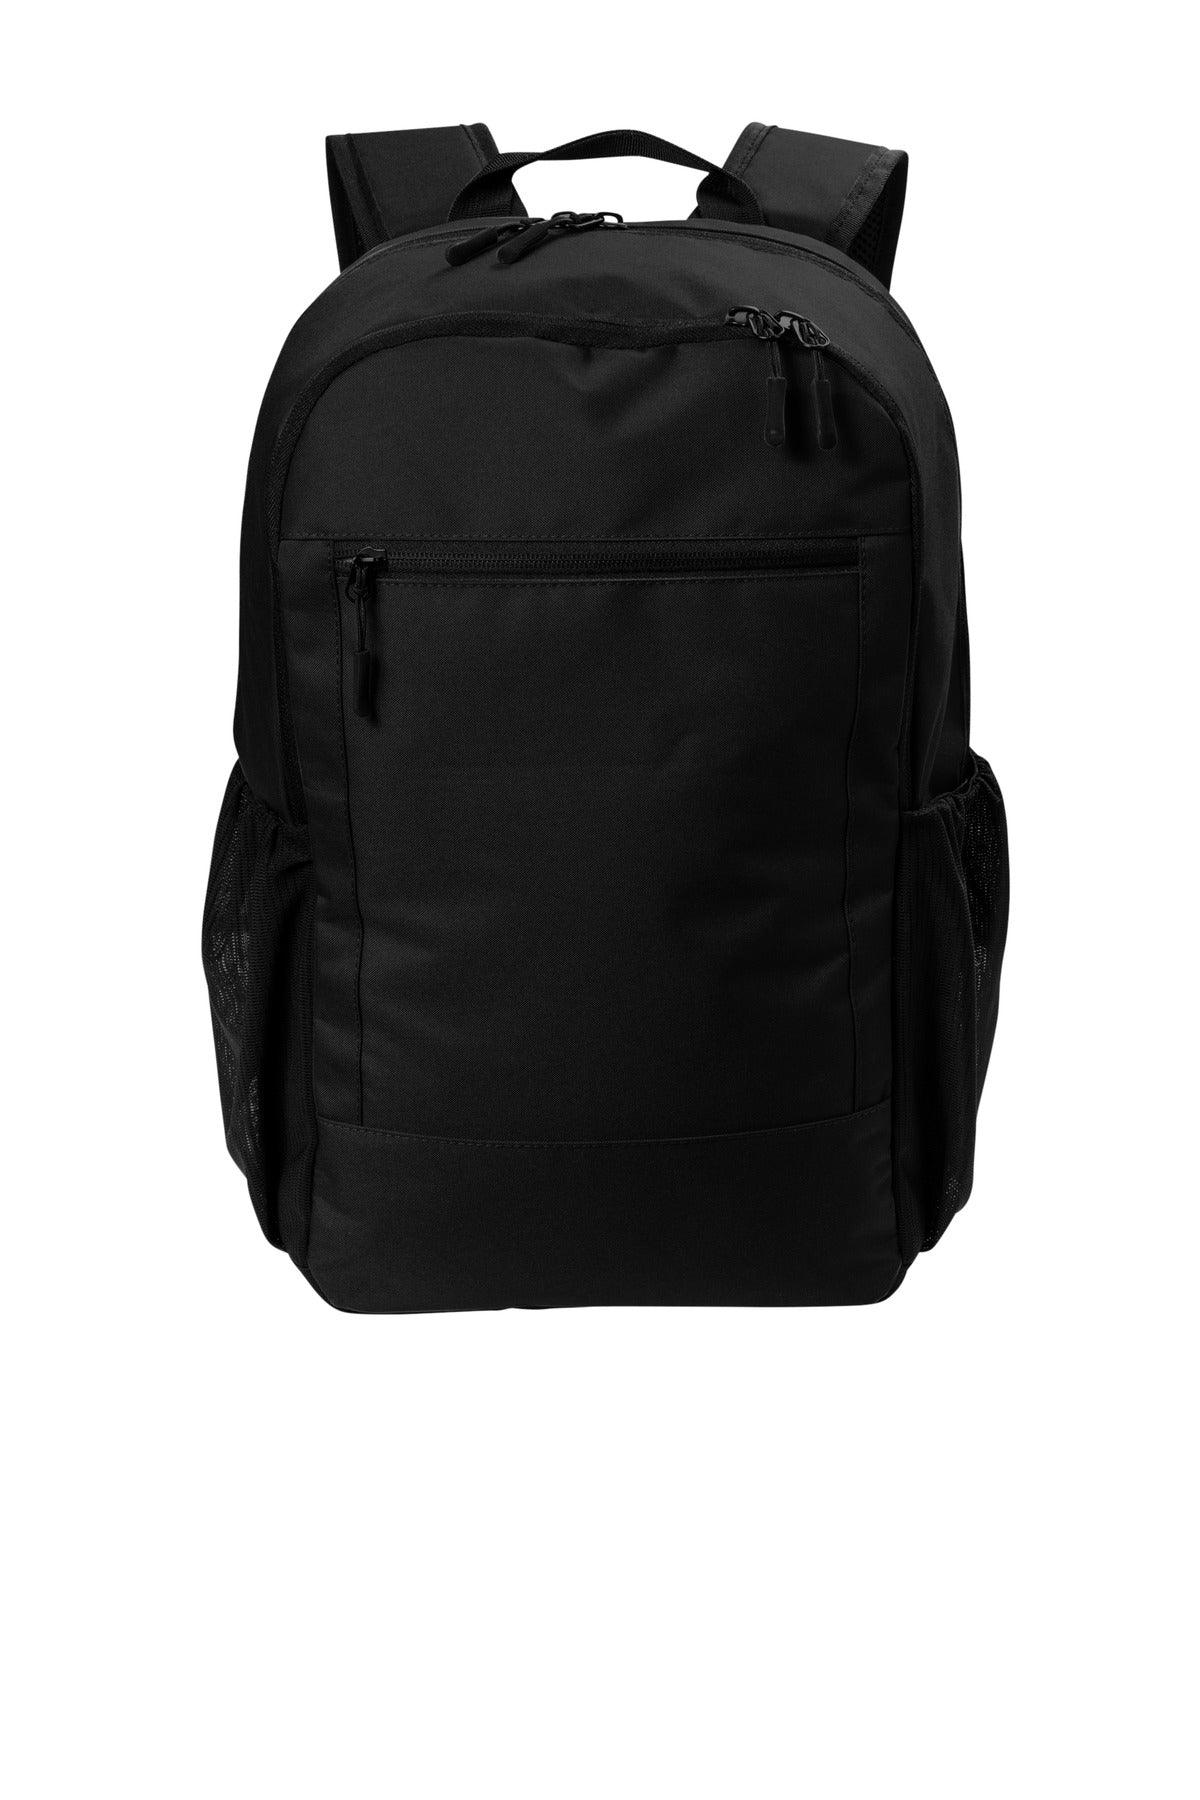 Port Authority Daily Commute Backpack BG226 - Dresses Max